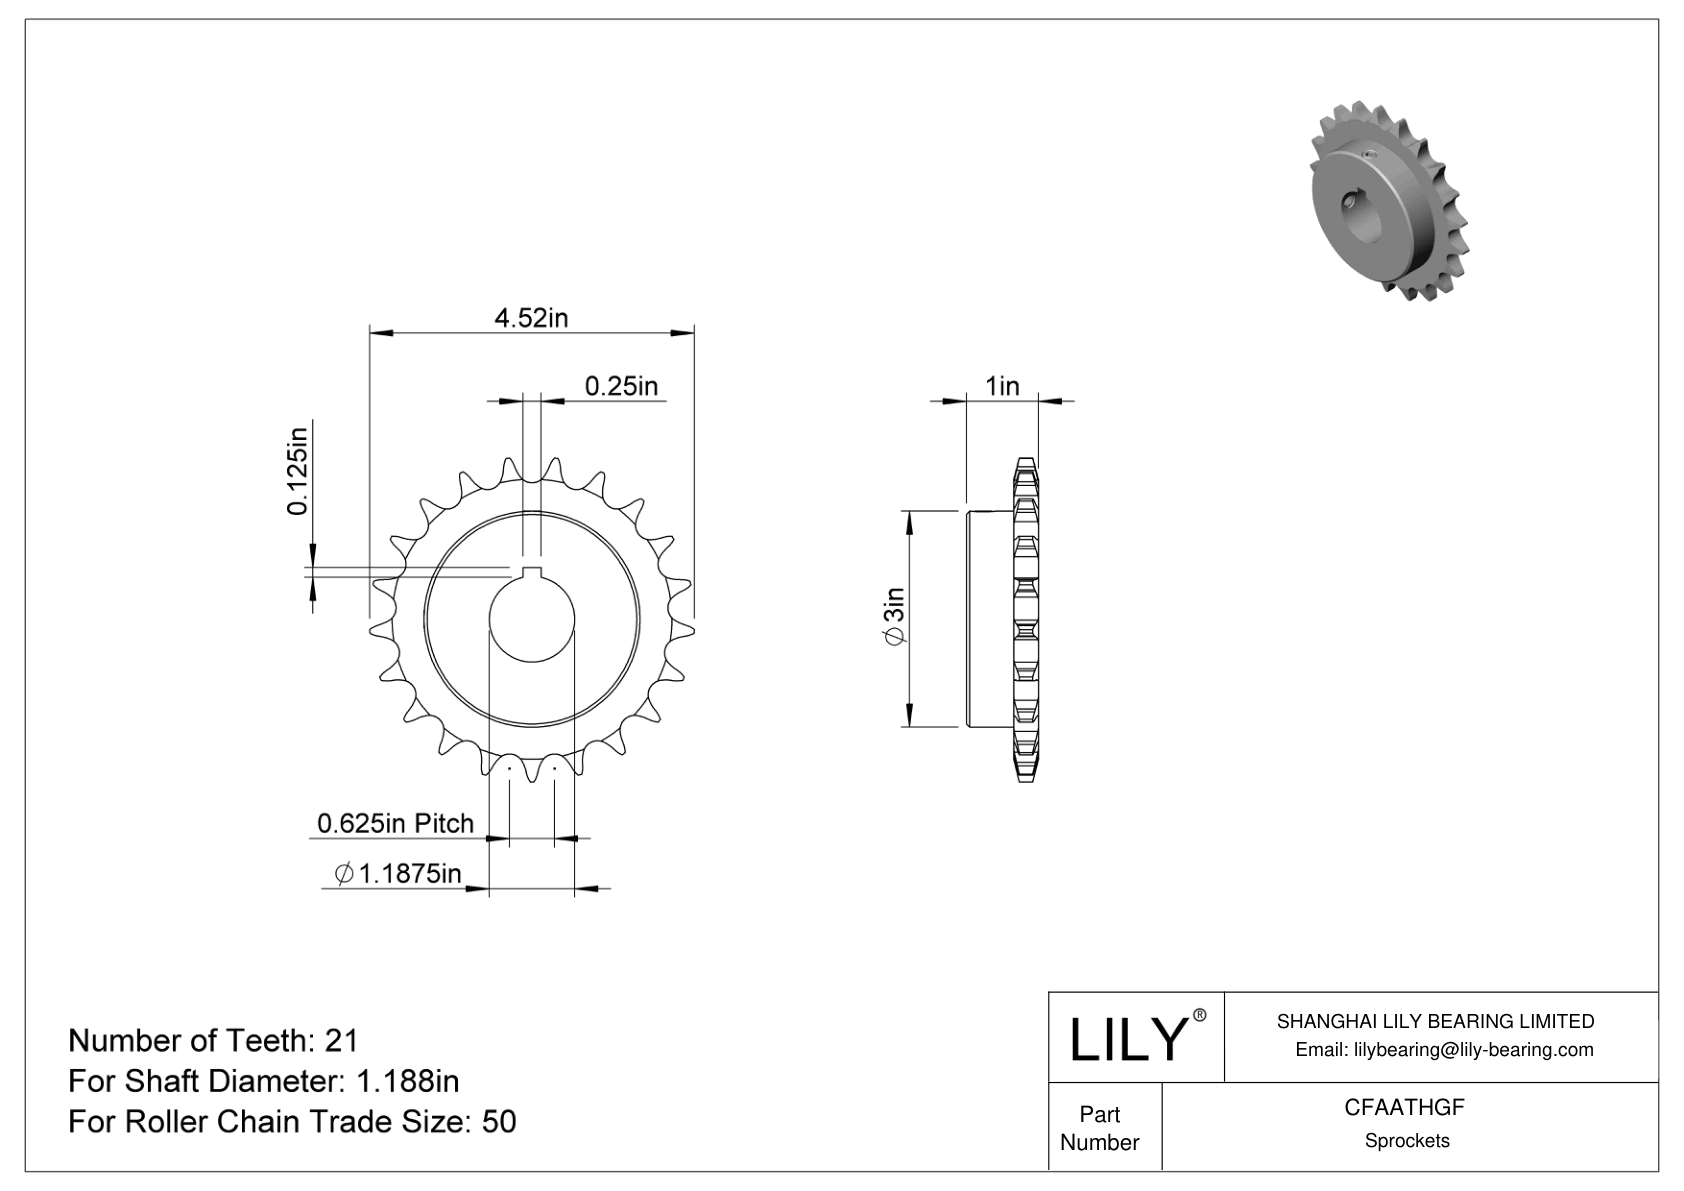 CFAATHGF Wear-Resistant Sprockets for ANSI Roller Chain cad drawing